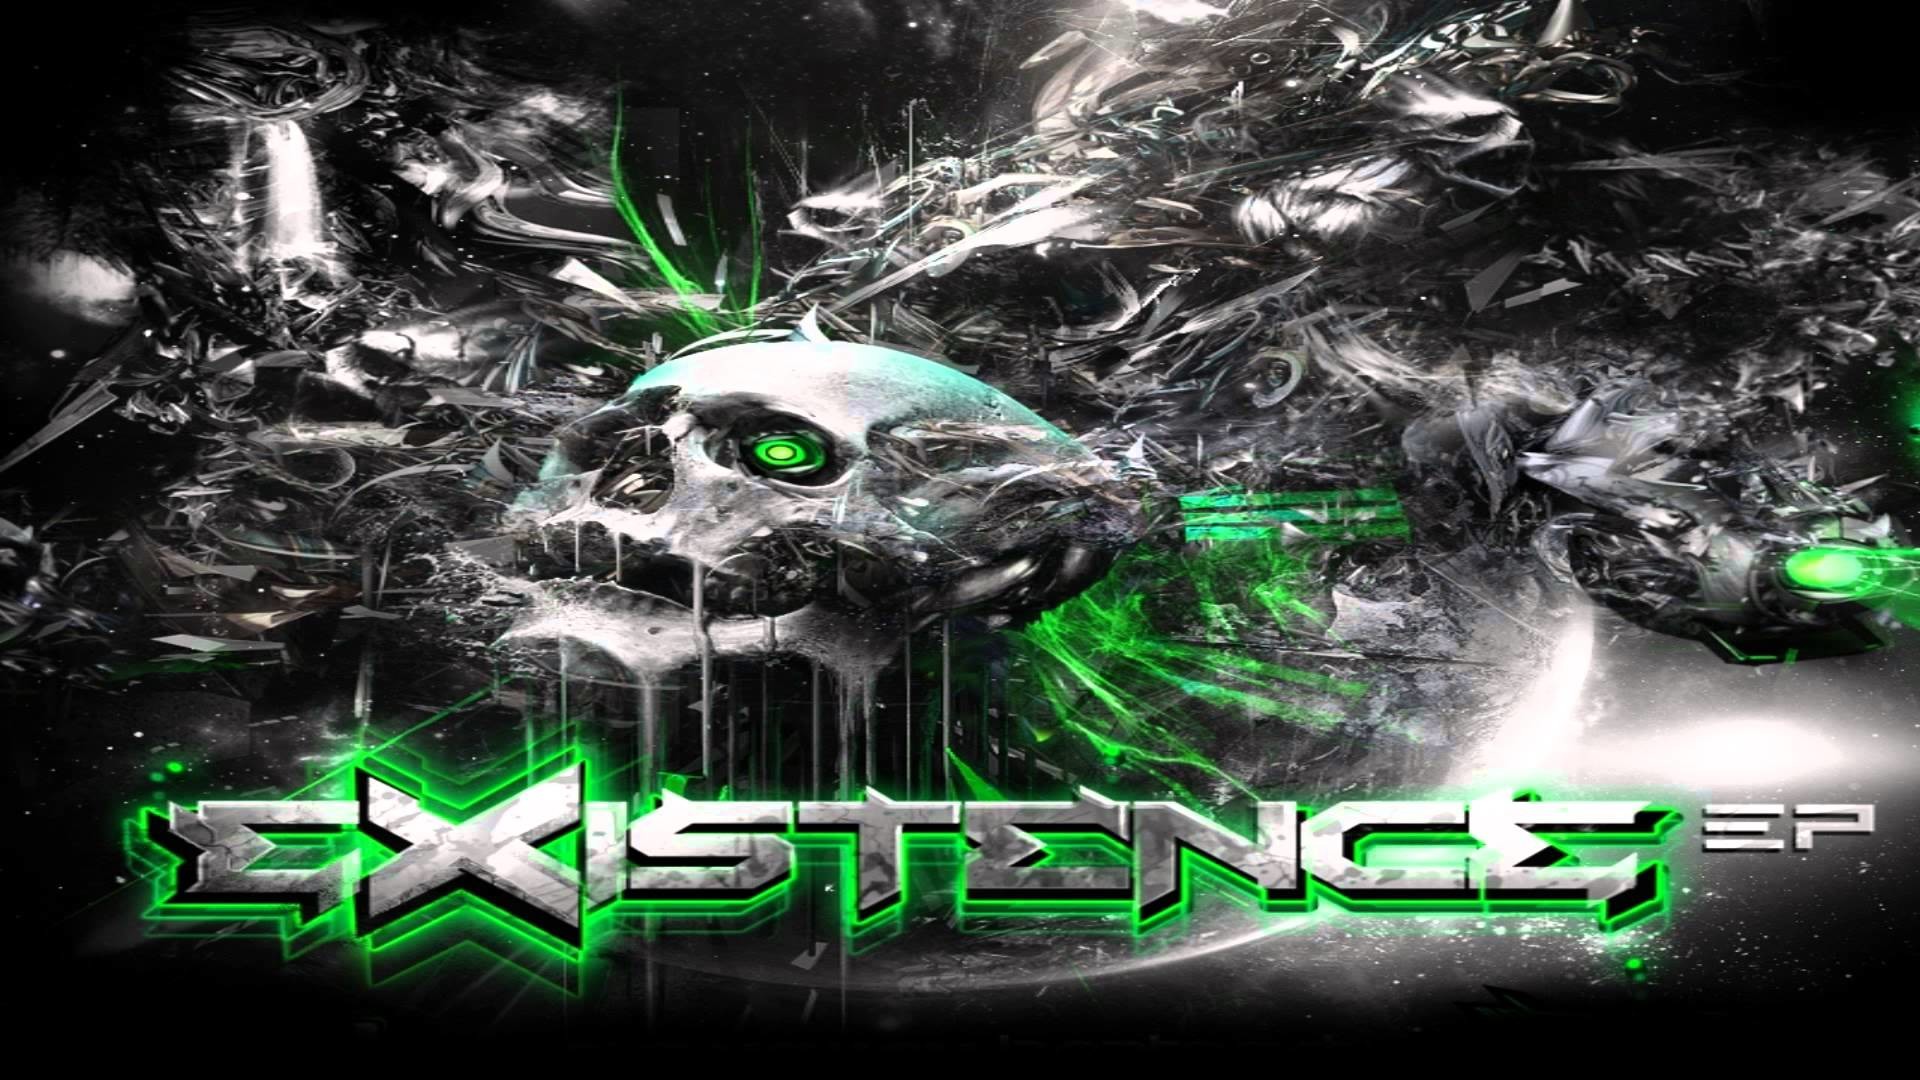 1920x1080 Awesome Excision Images Collection: Excision Wallpapers